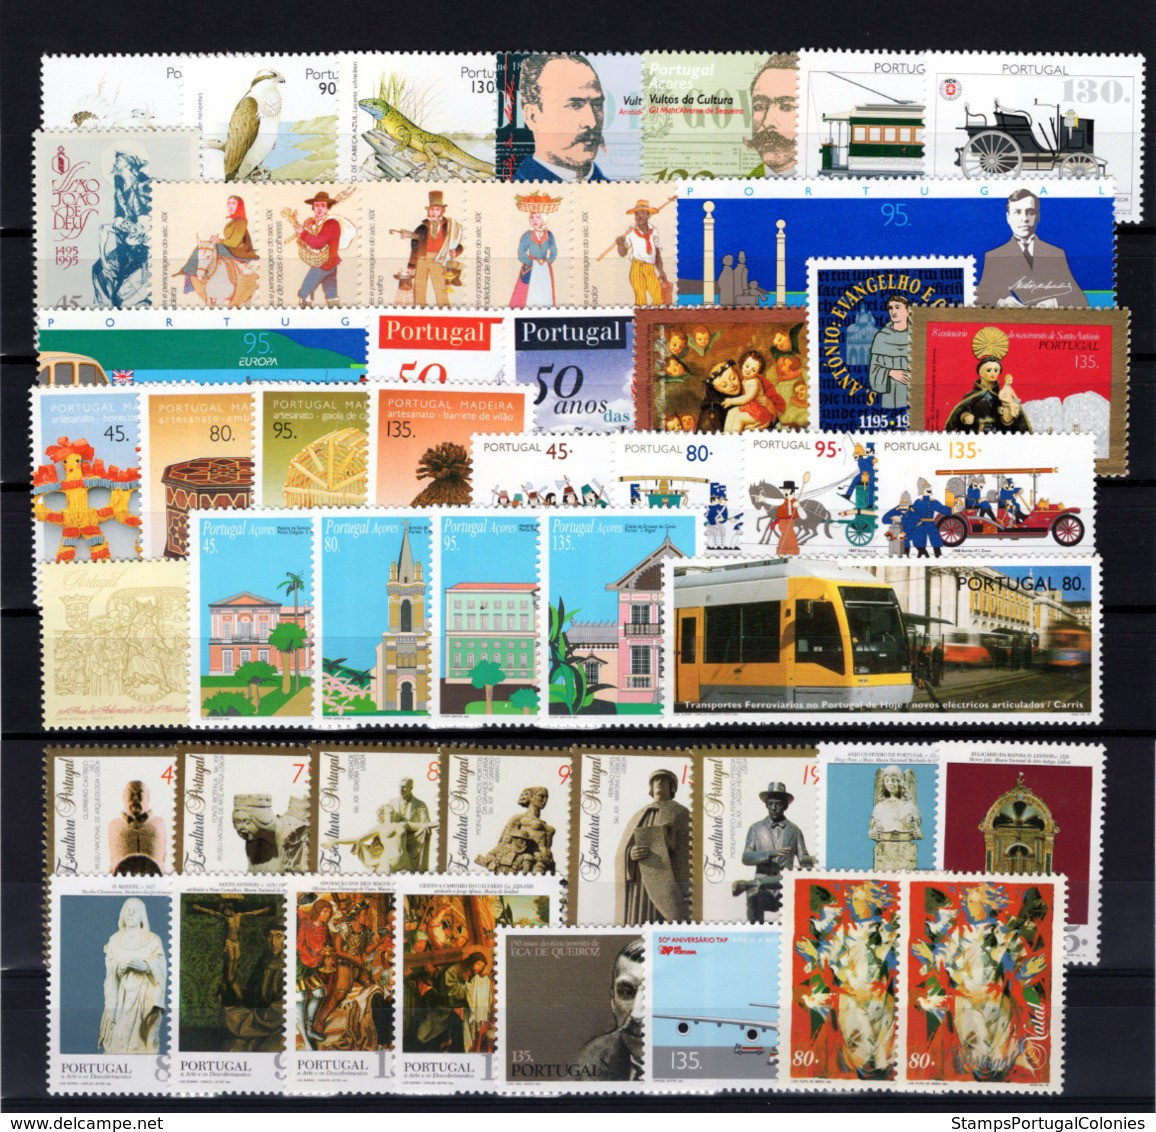 1995 Portugal Azores Madeira Complete Year MNH Stamps. Année Compléte NeufSansCharnière. Ano Completo Novo Sem Charneira - Full Years